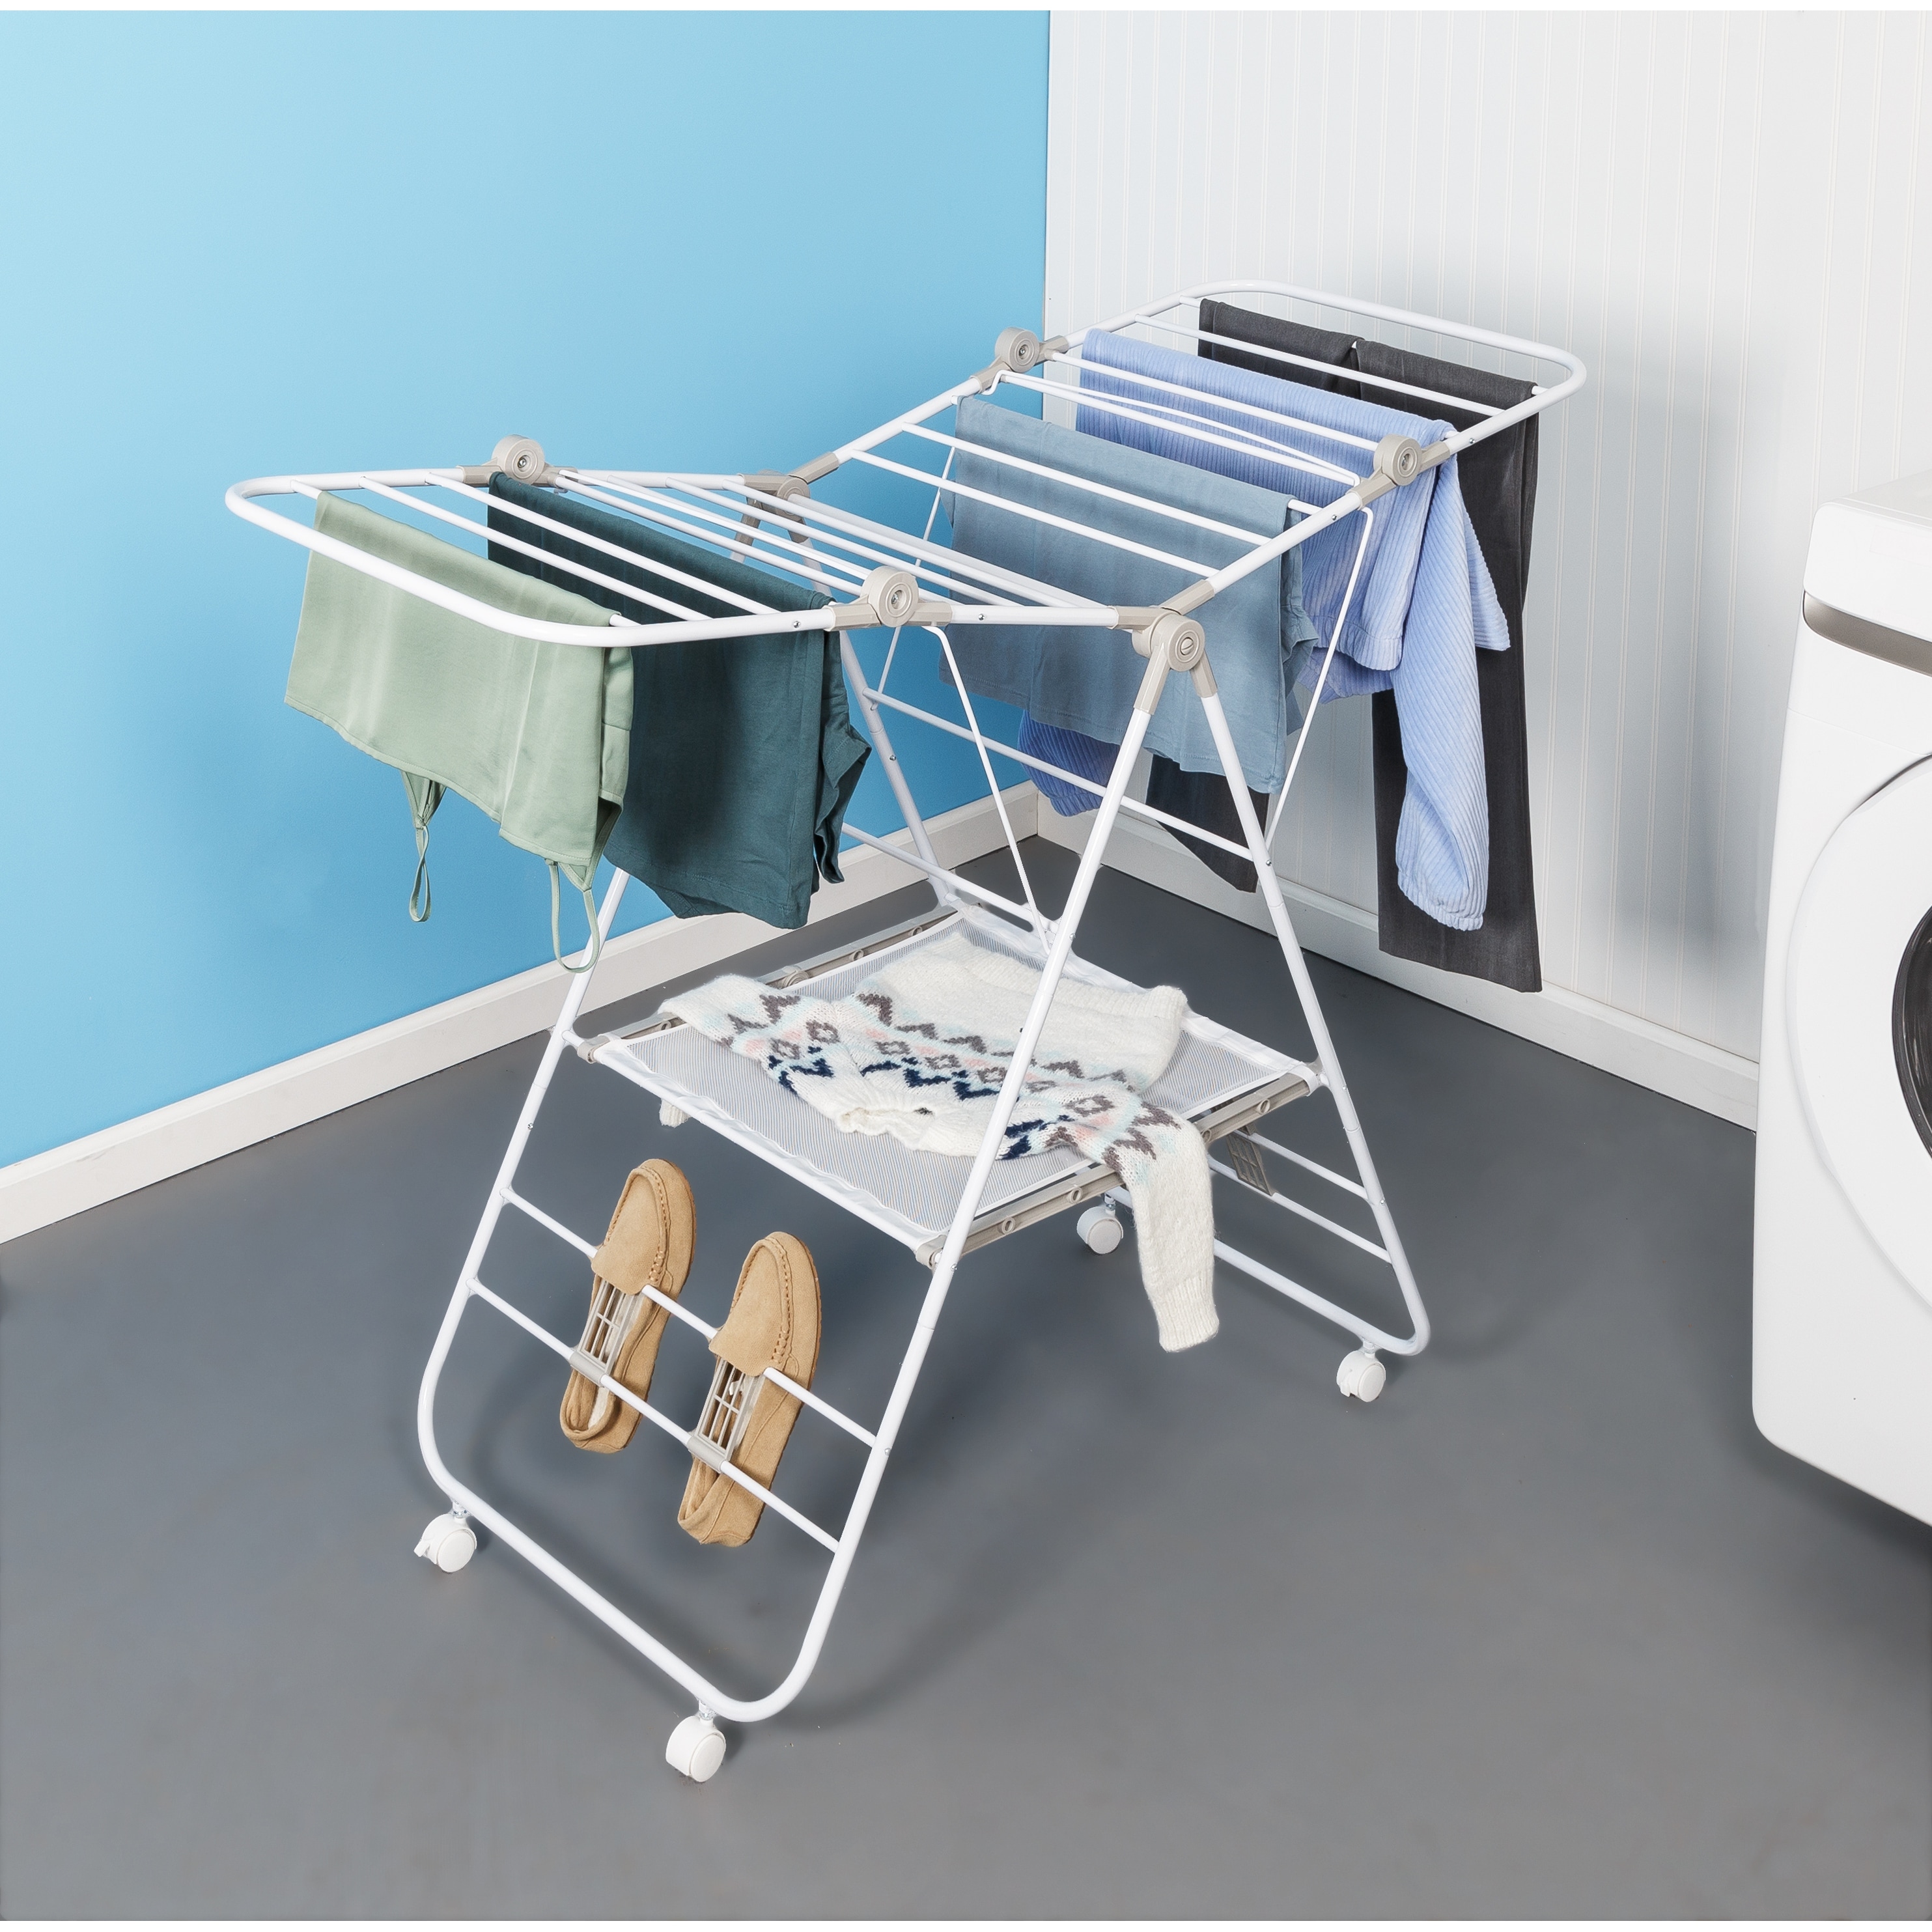 https://ak1.ostkcdn.com/images/products/is/images/direct/66c0f6bd065f2ee821360a7722514212063c5296/White-Folding-Wing-Clothes-Drying-Rack-with-Wheels.jpg